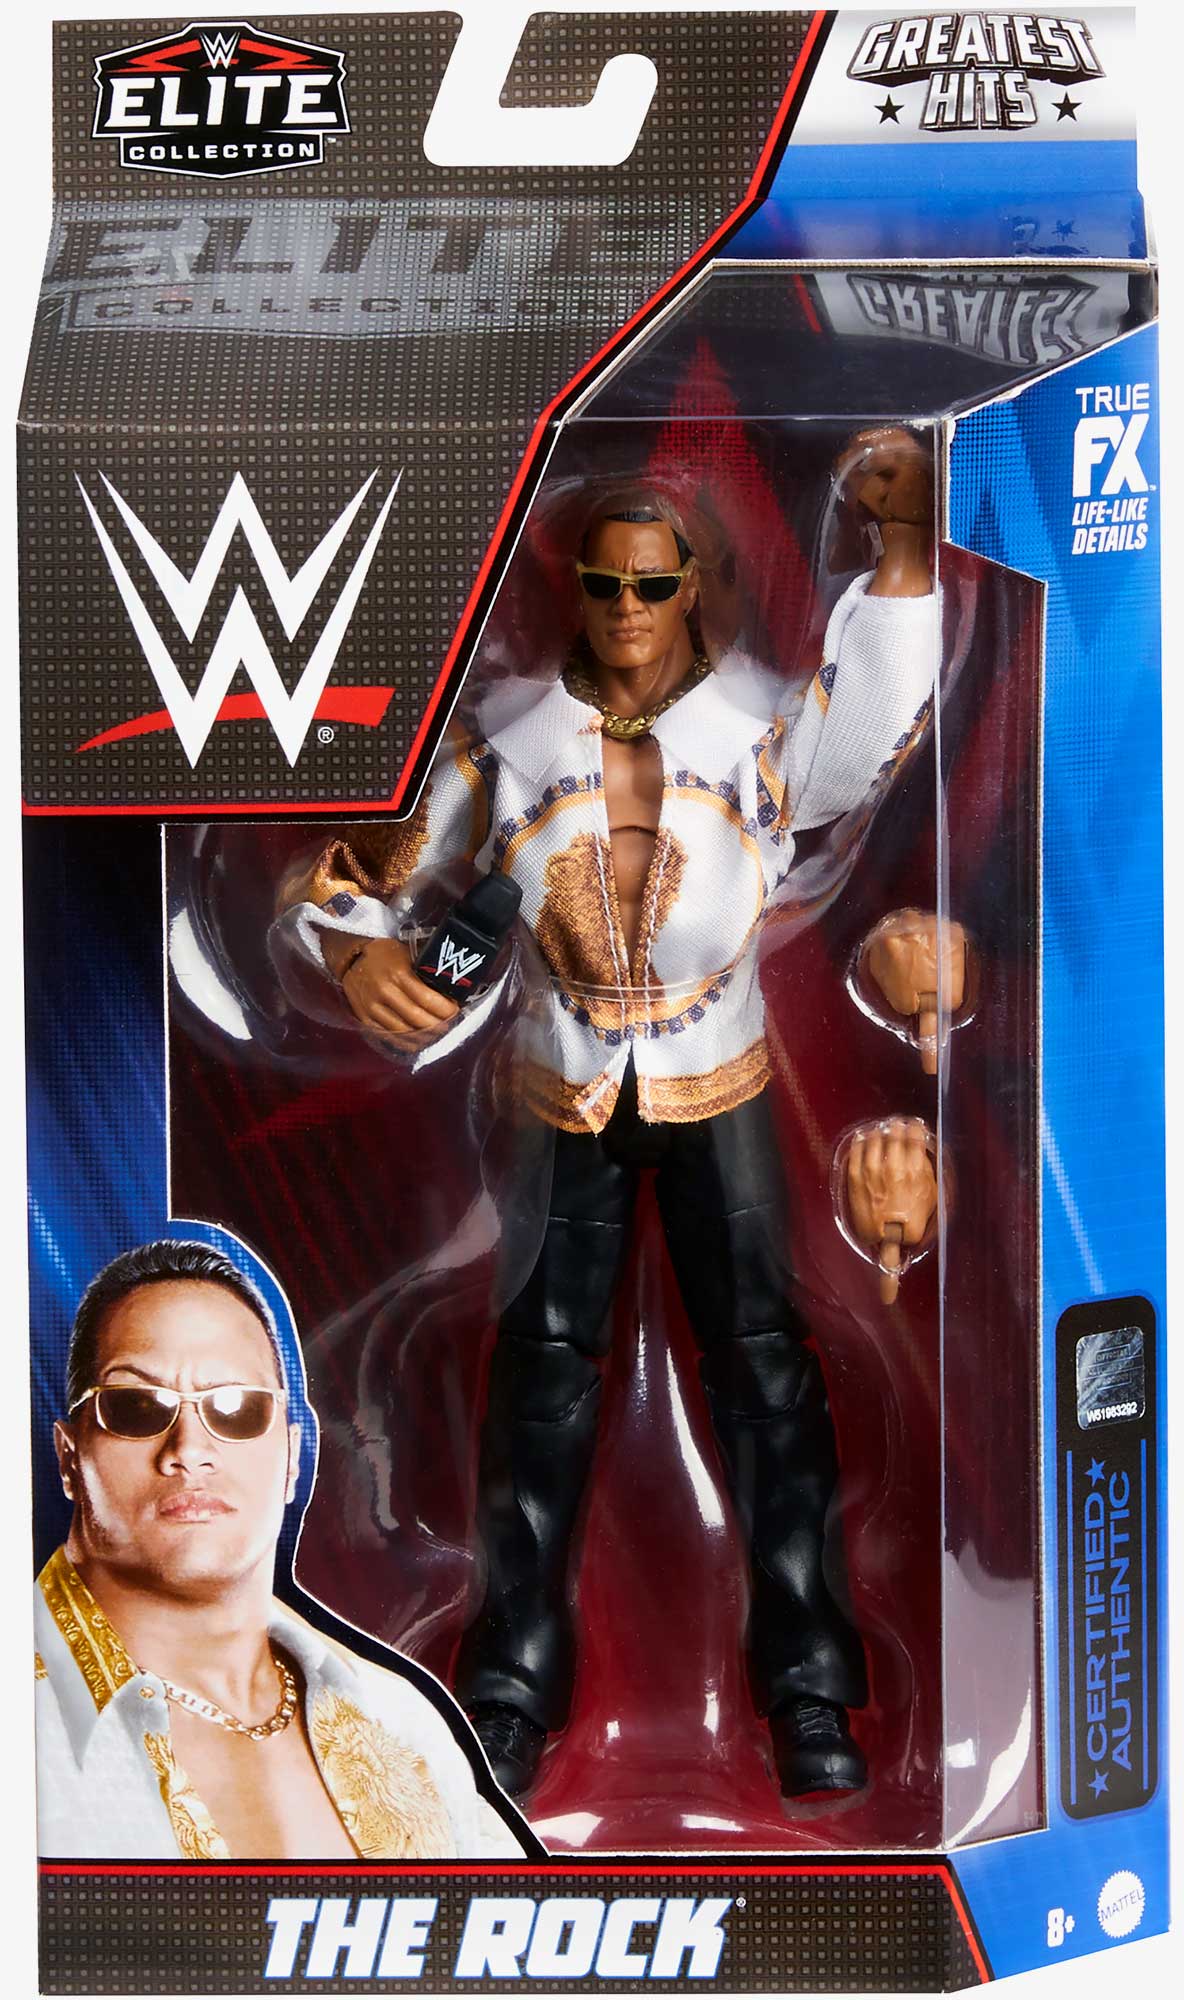 The Rock WWE Elite Collection Greatest Hits Series #1 Action